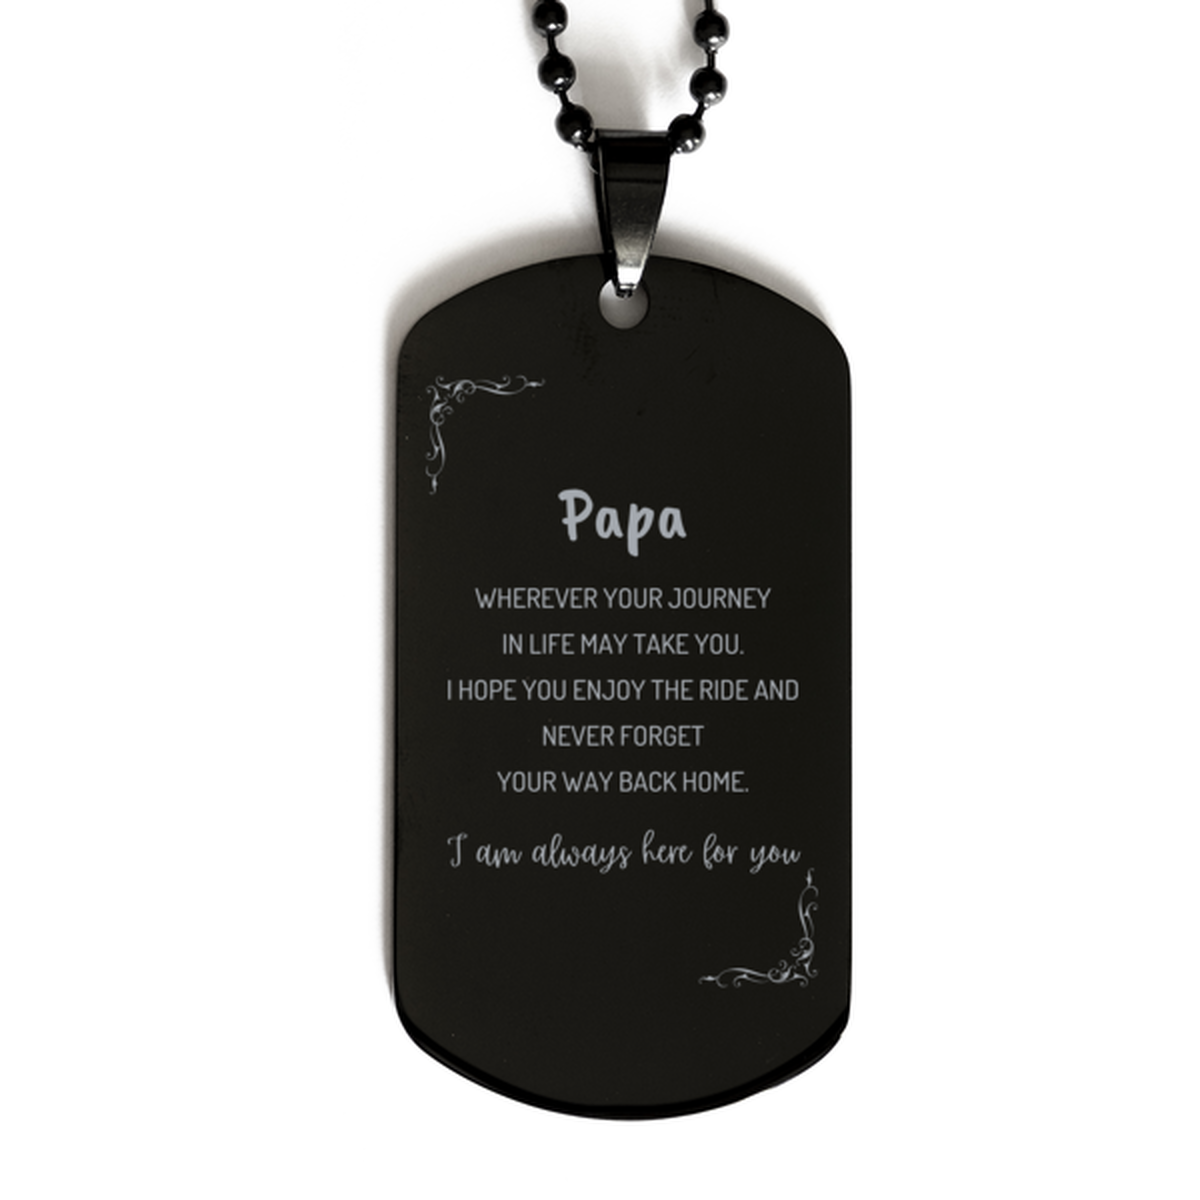 Papa wherever your journey in life may take you, I am always here for you Papa Black Dog Tag, Awesome Christmas Gifts For Papa, Papa Birthday Gifts for Men Women Family Loved One